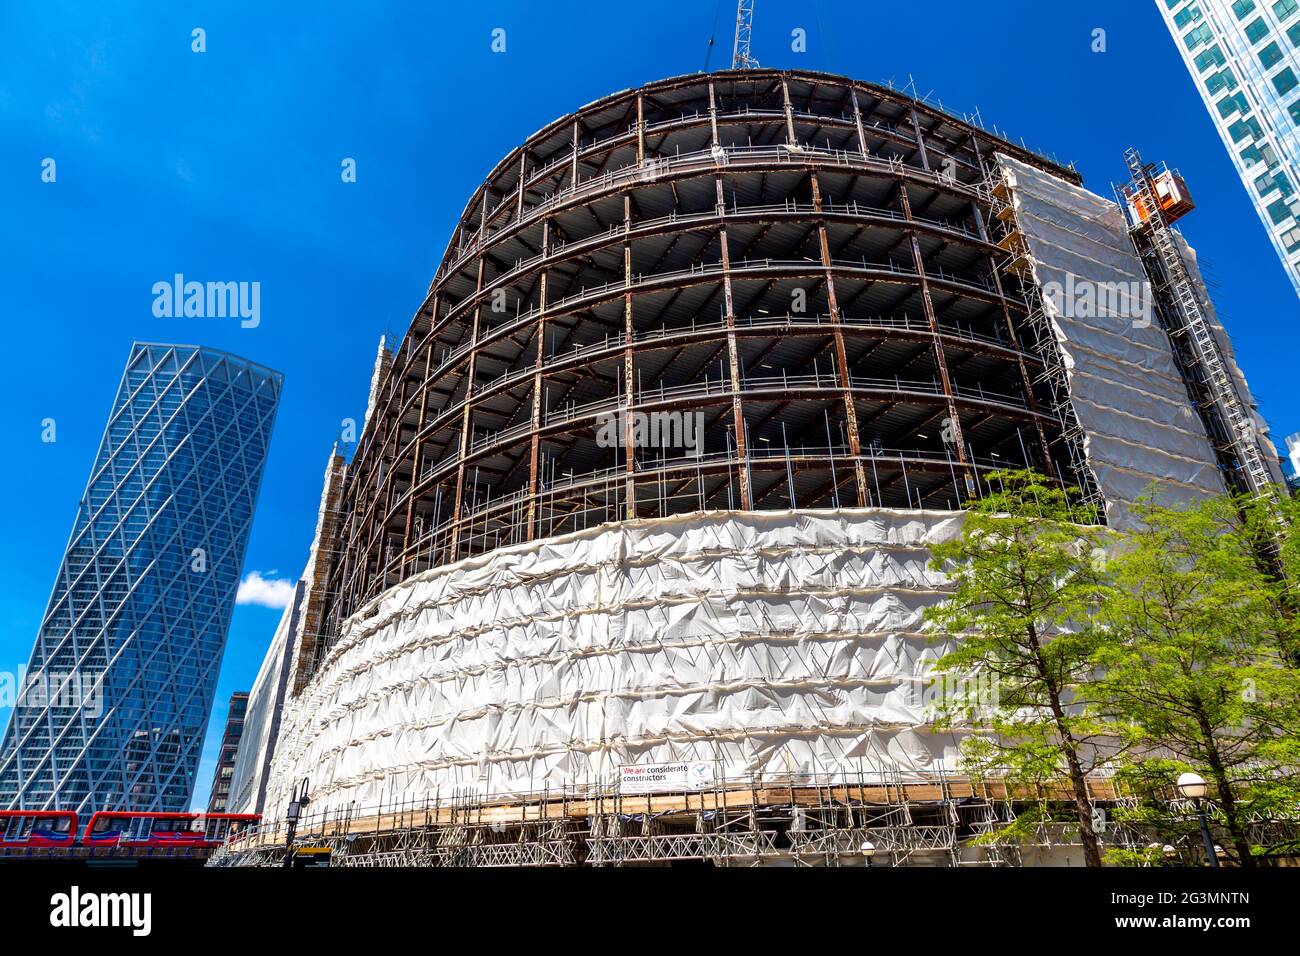 14 June 2021 - Stripping works of Thomson Reuters building underway, as the builind is undergoing a complete renovation and extension, Reuters Plaza, Stock Photo